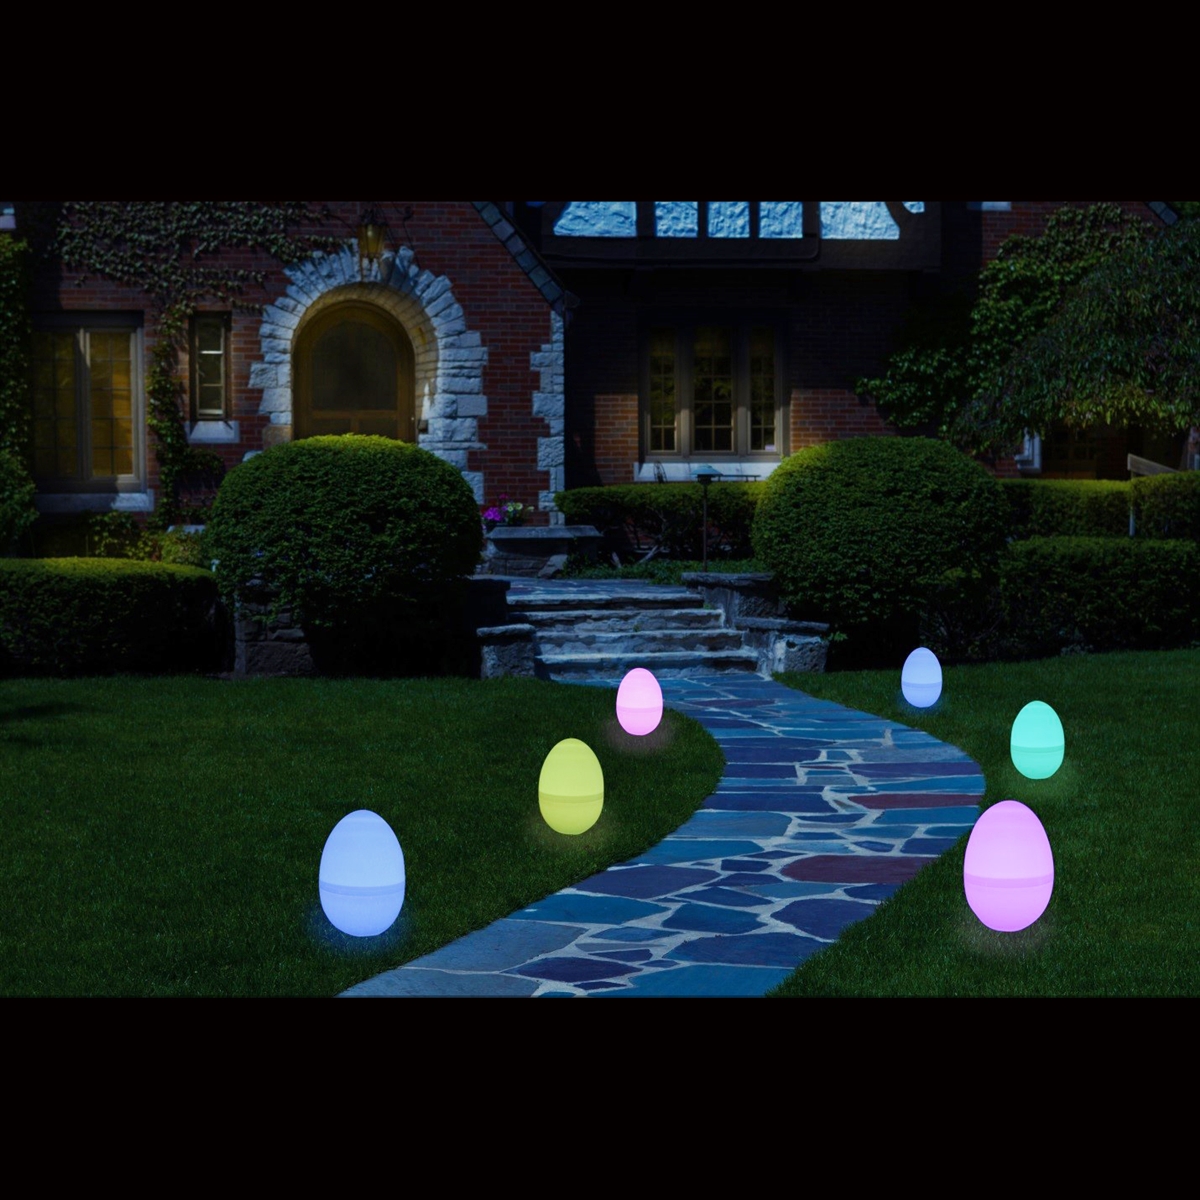 2.5 Light Up Easter Egg With Color Changing LED